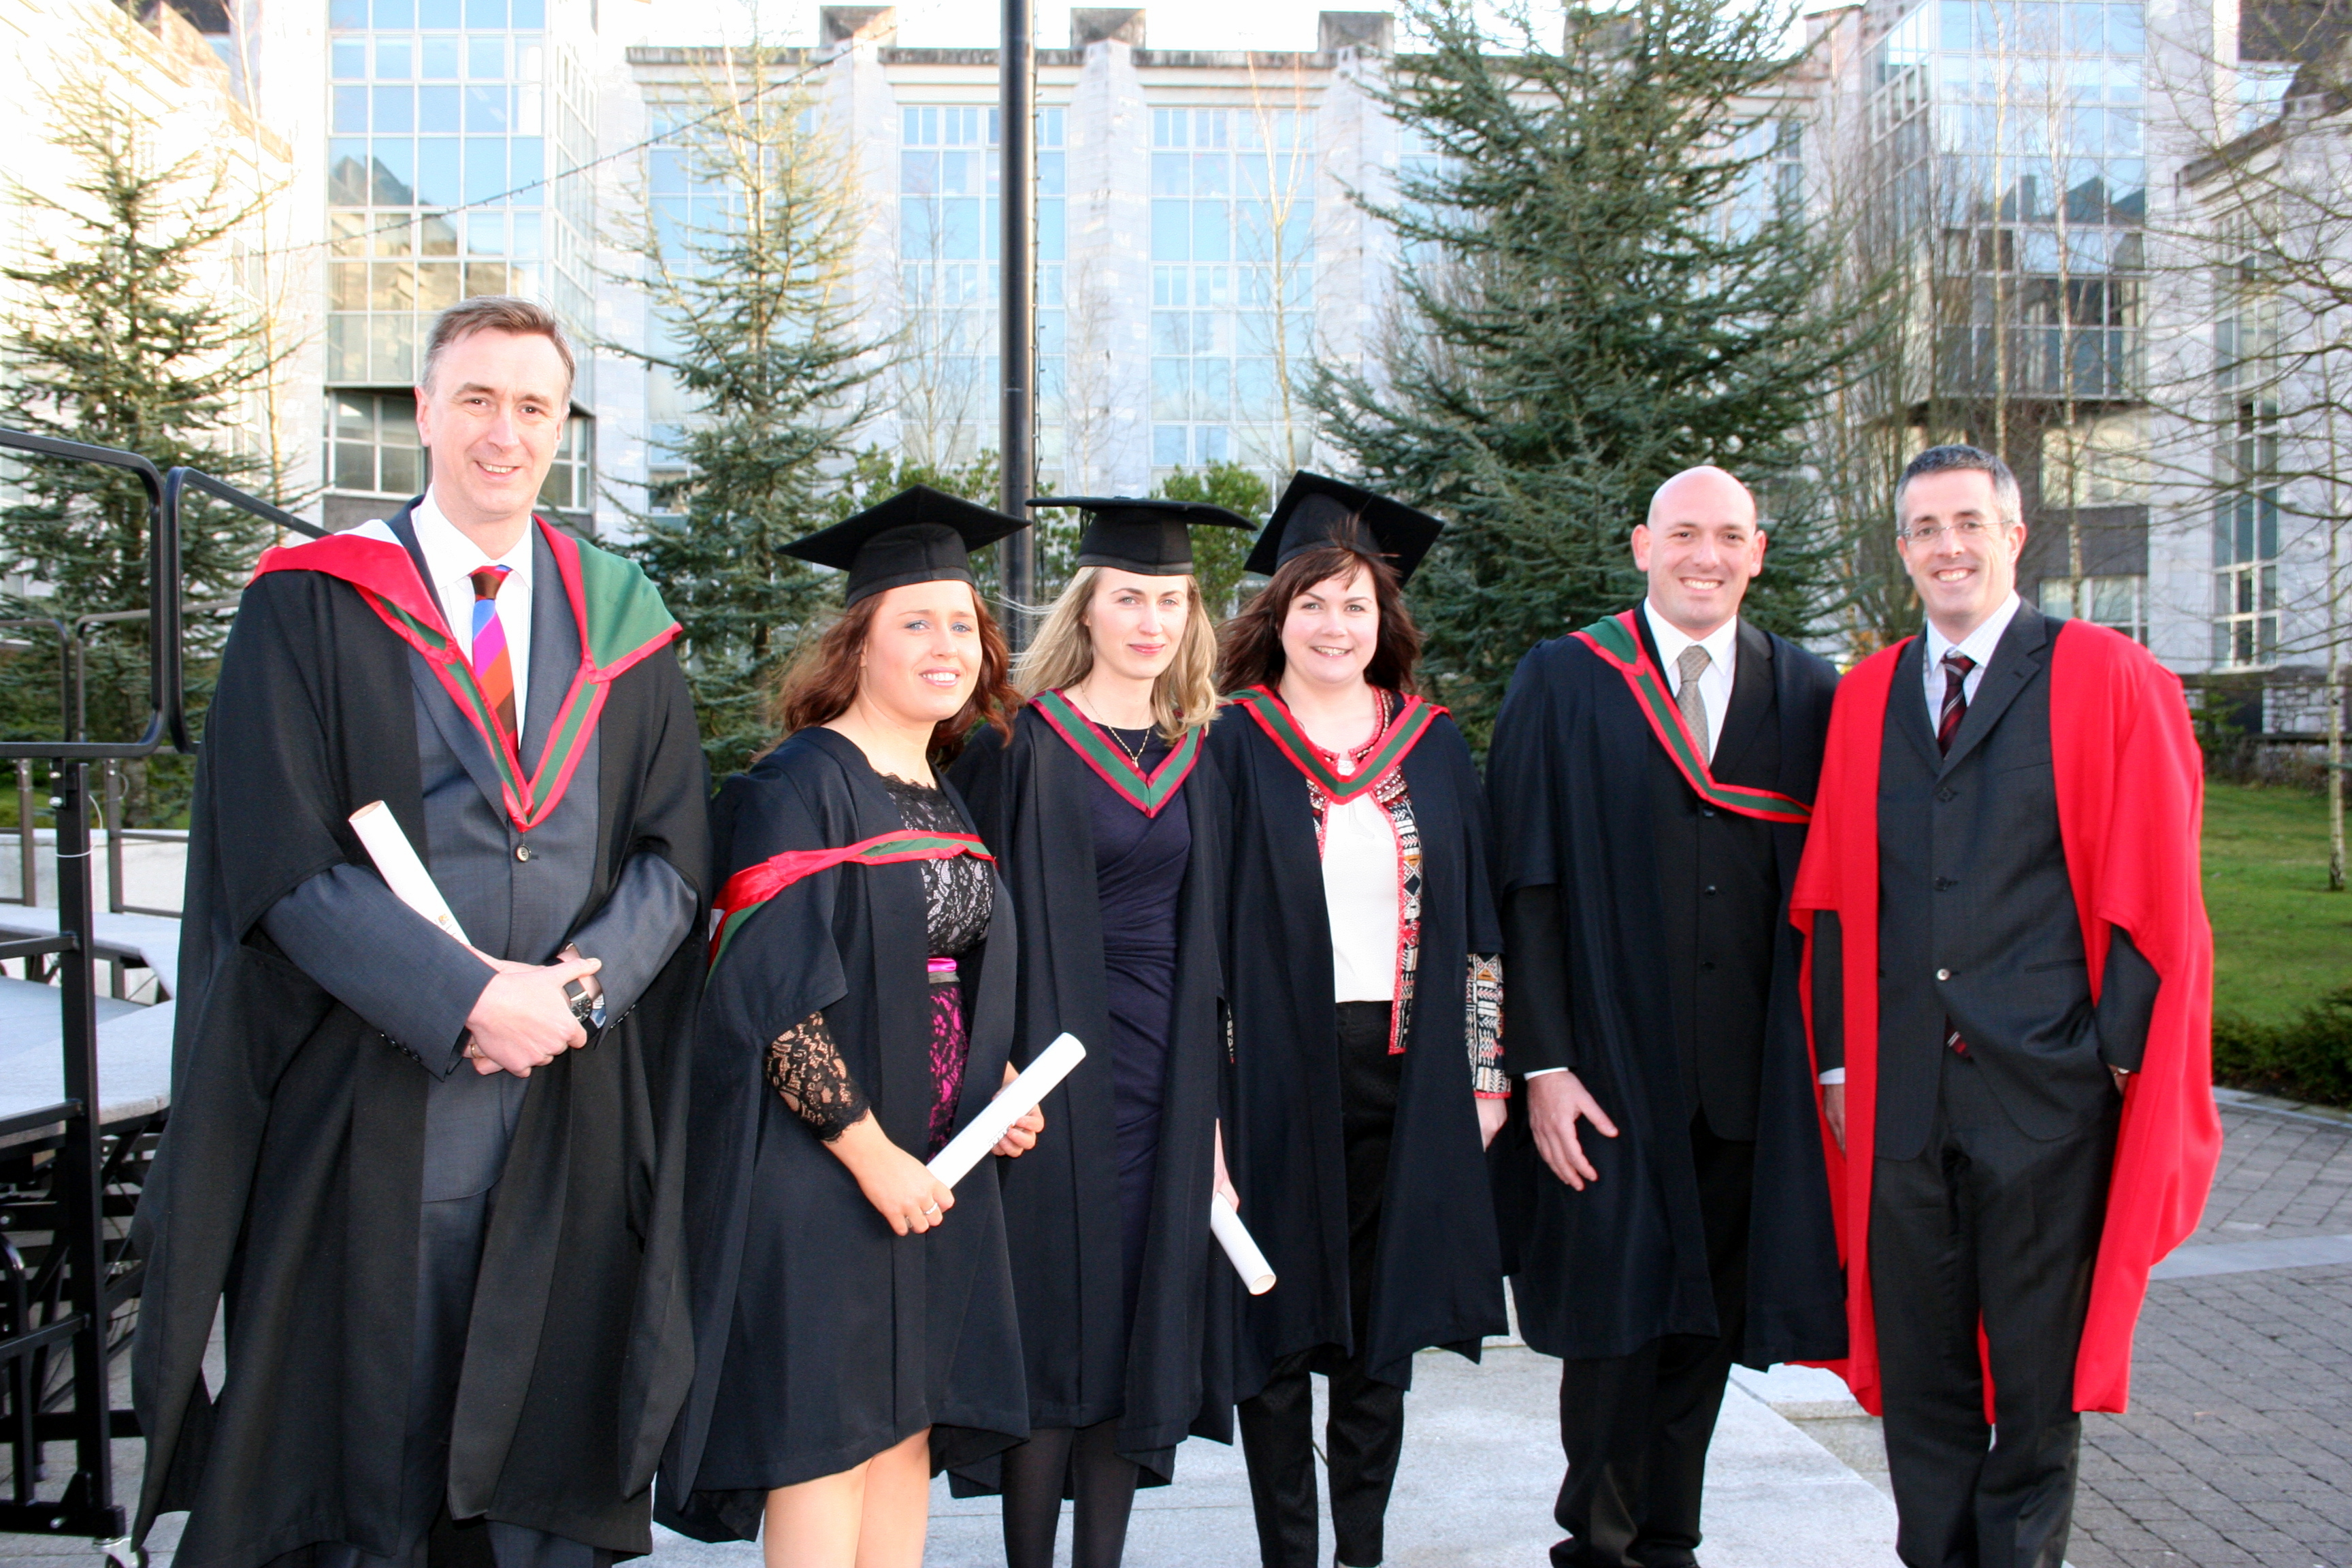 Congratulations to our recent MSc in Pharmaceutical Technology and Quality Systems graduates